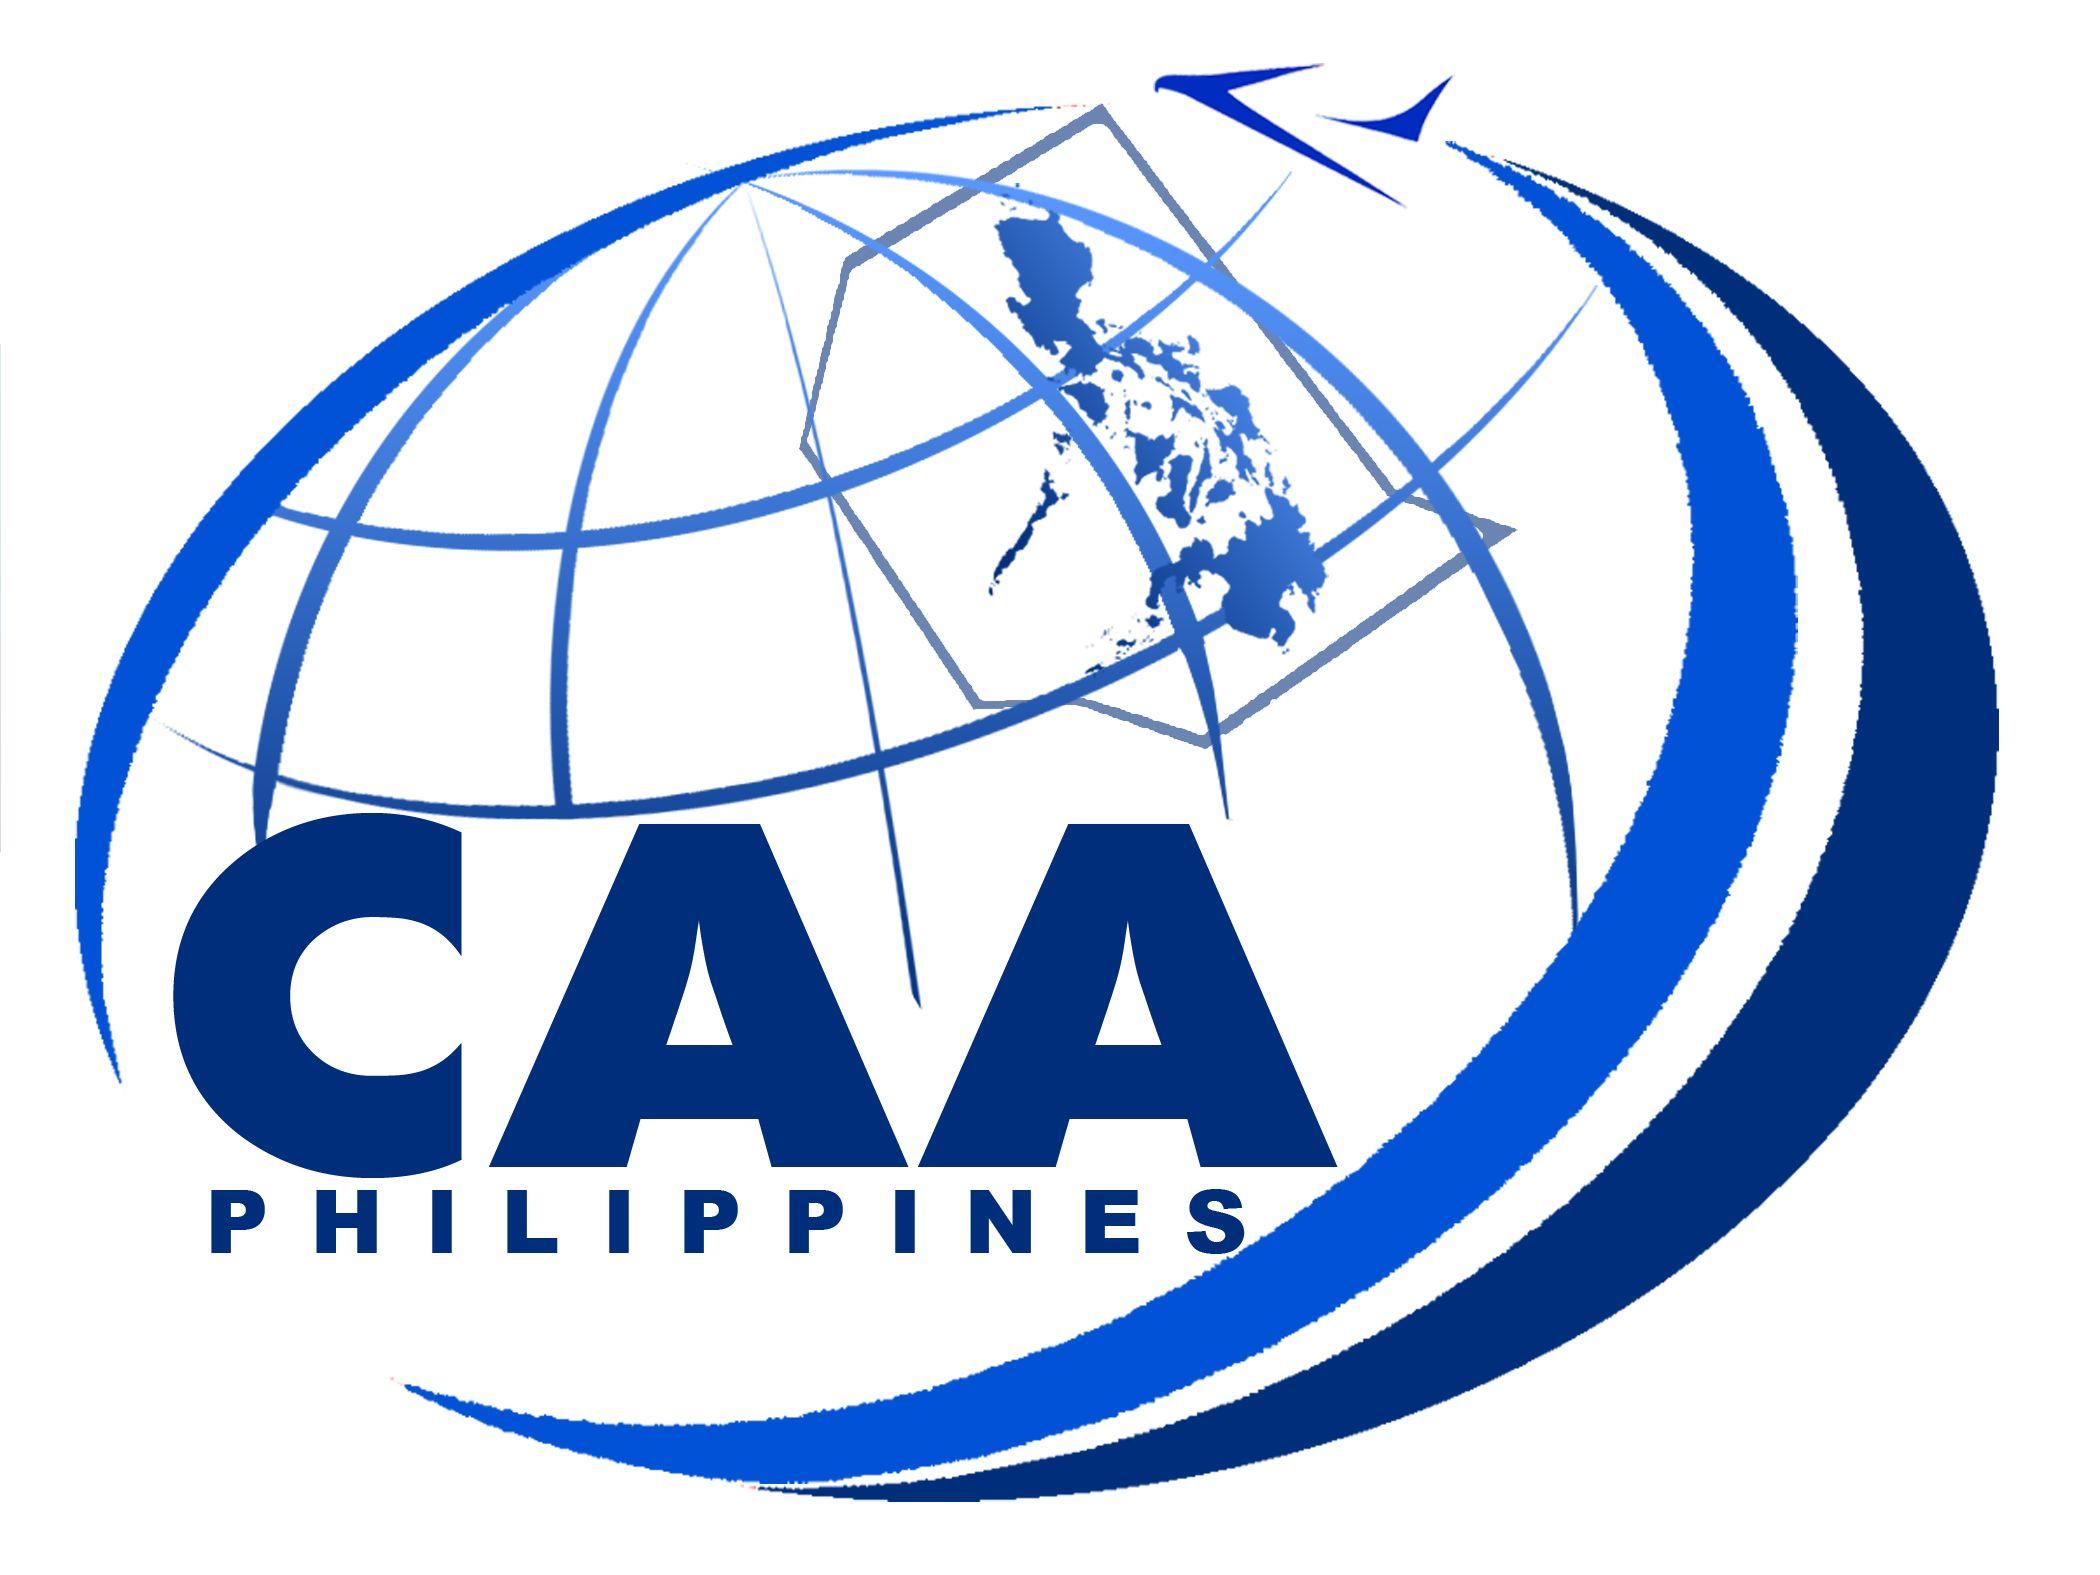 Continental Globe Logo - Civil Aviation Authority of the Philippines